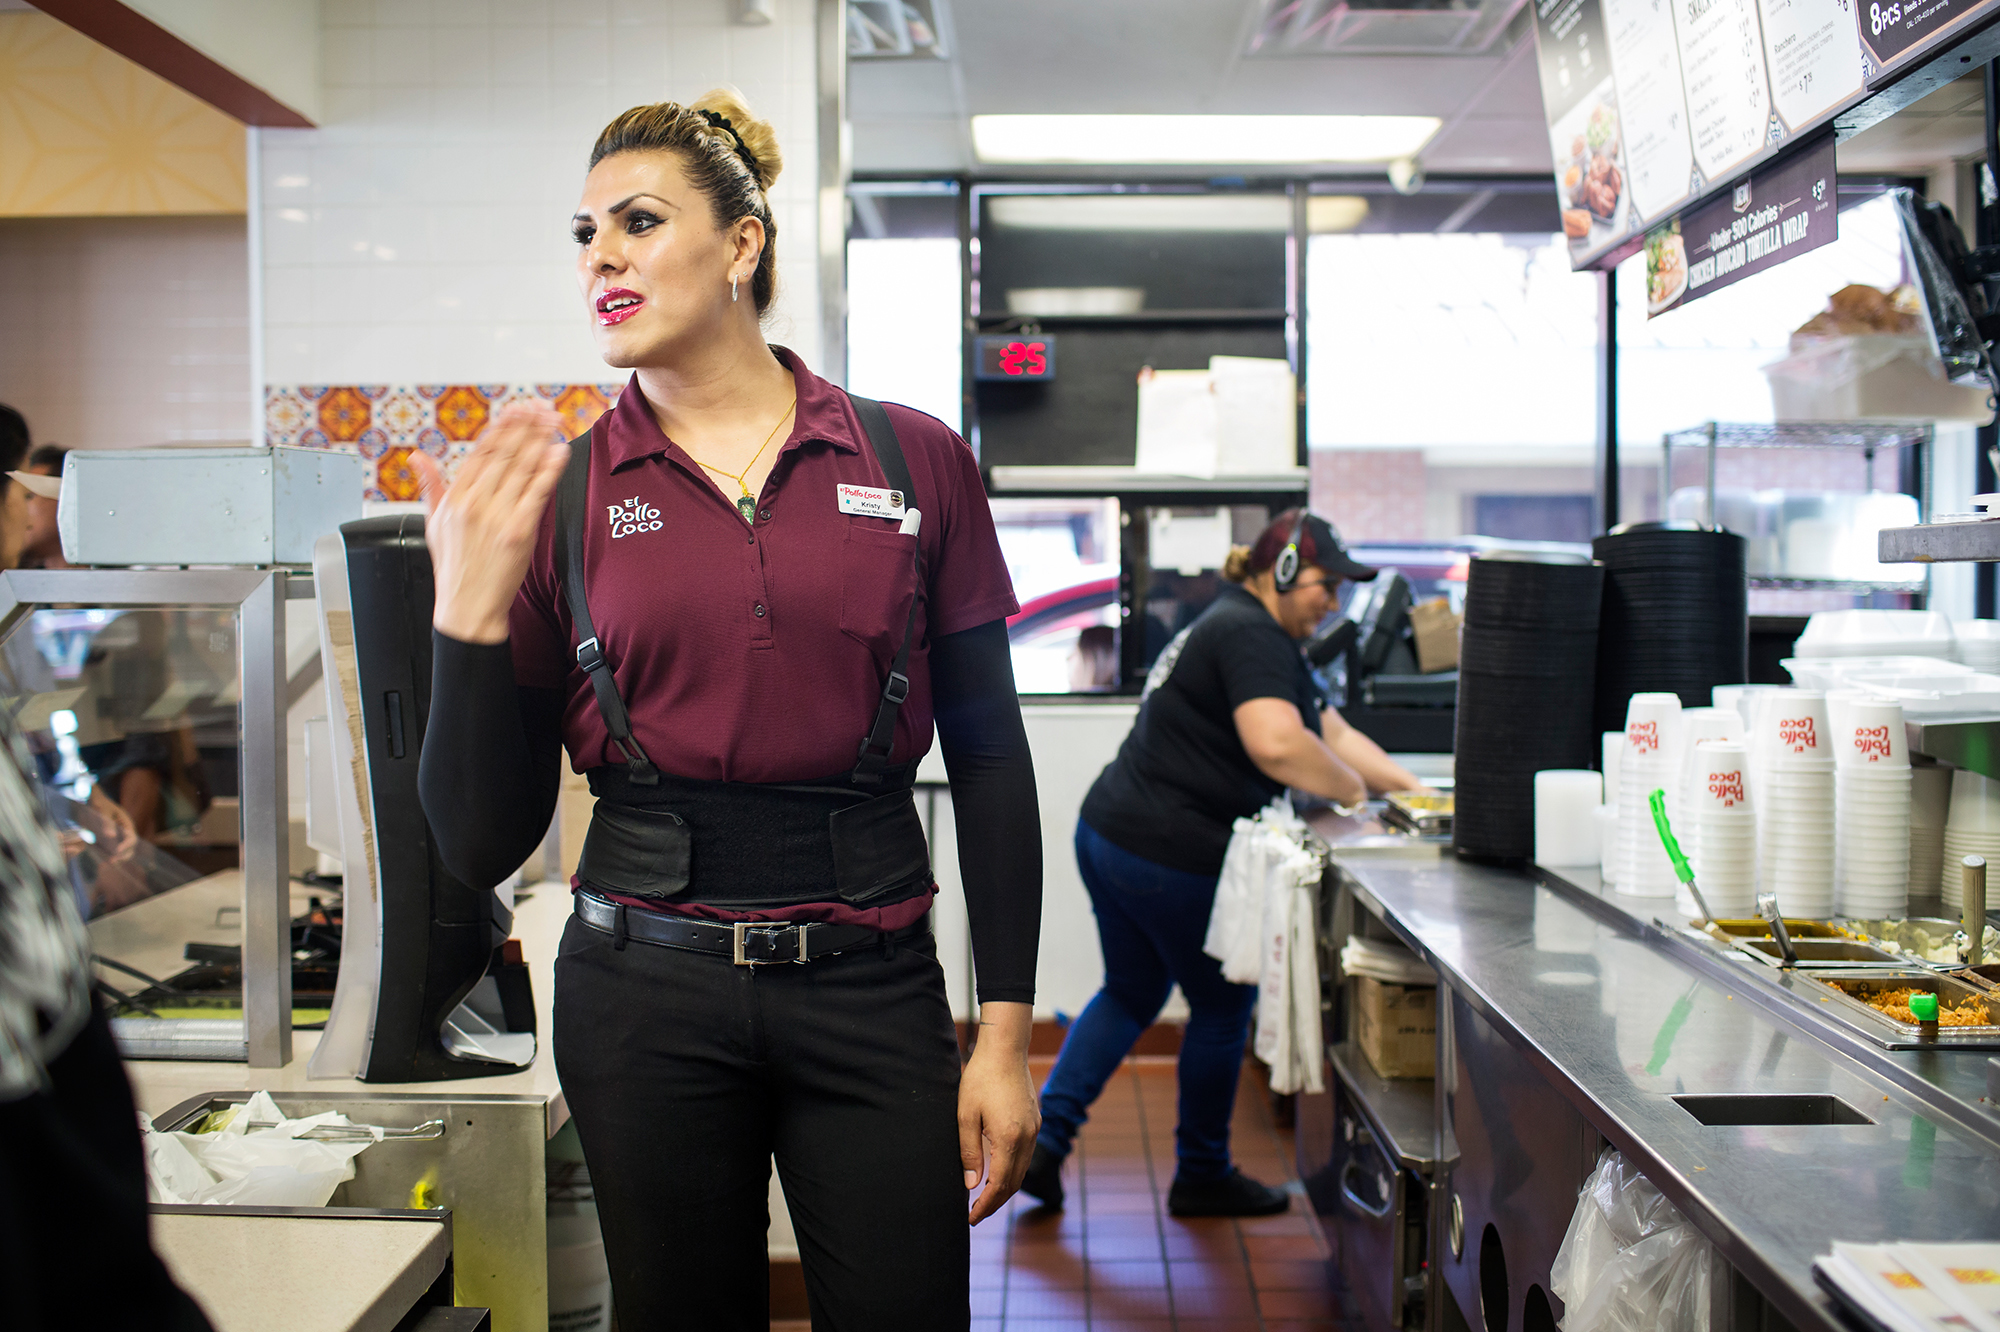 General Manager Kristy Ramirez helps a customer at one of the El Pollo Loco franchises owned by Michaela Mendelsohn in Southern California. Mendelsohn is a transgender activist who helped launch the nation's first large-scale jobs program for transgender people.